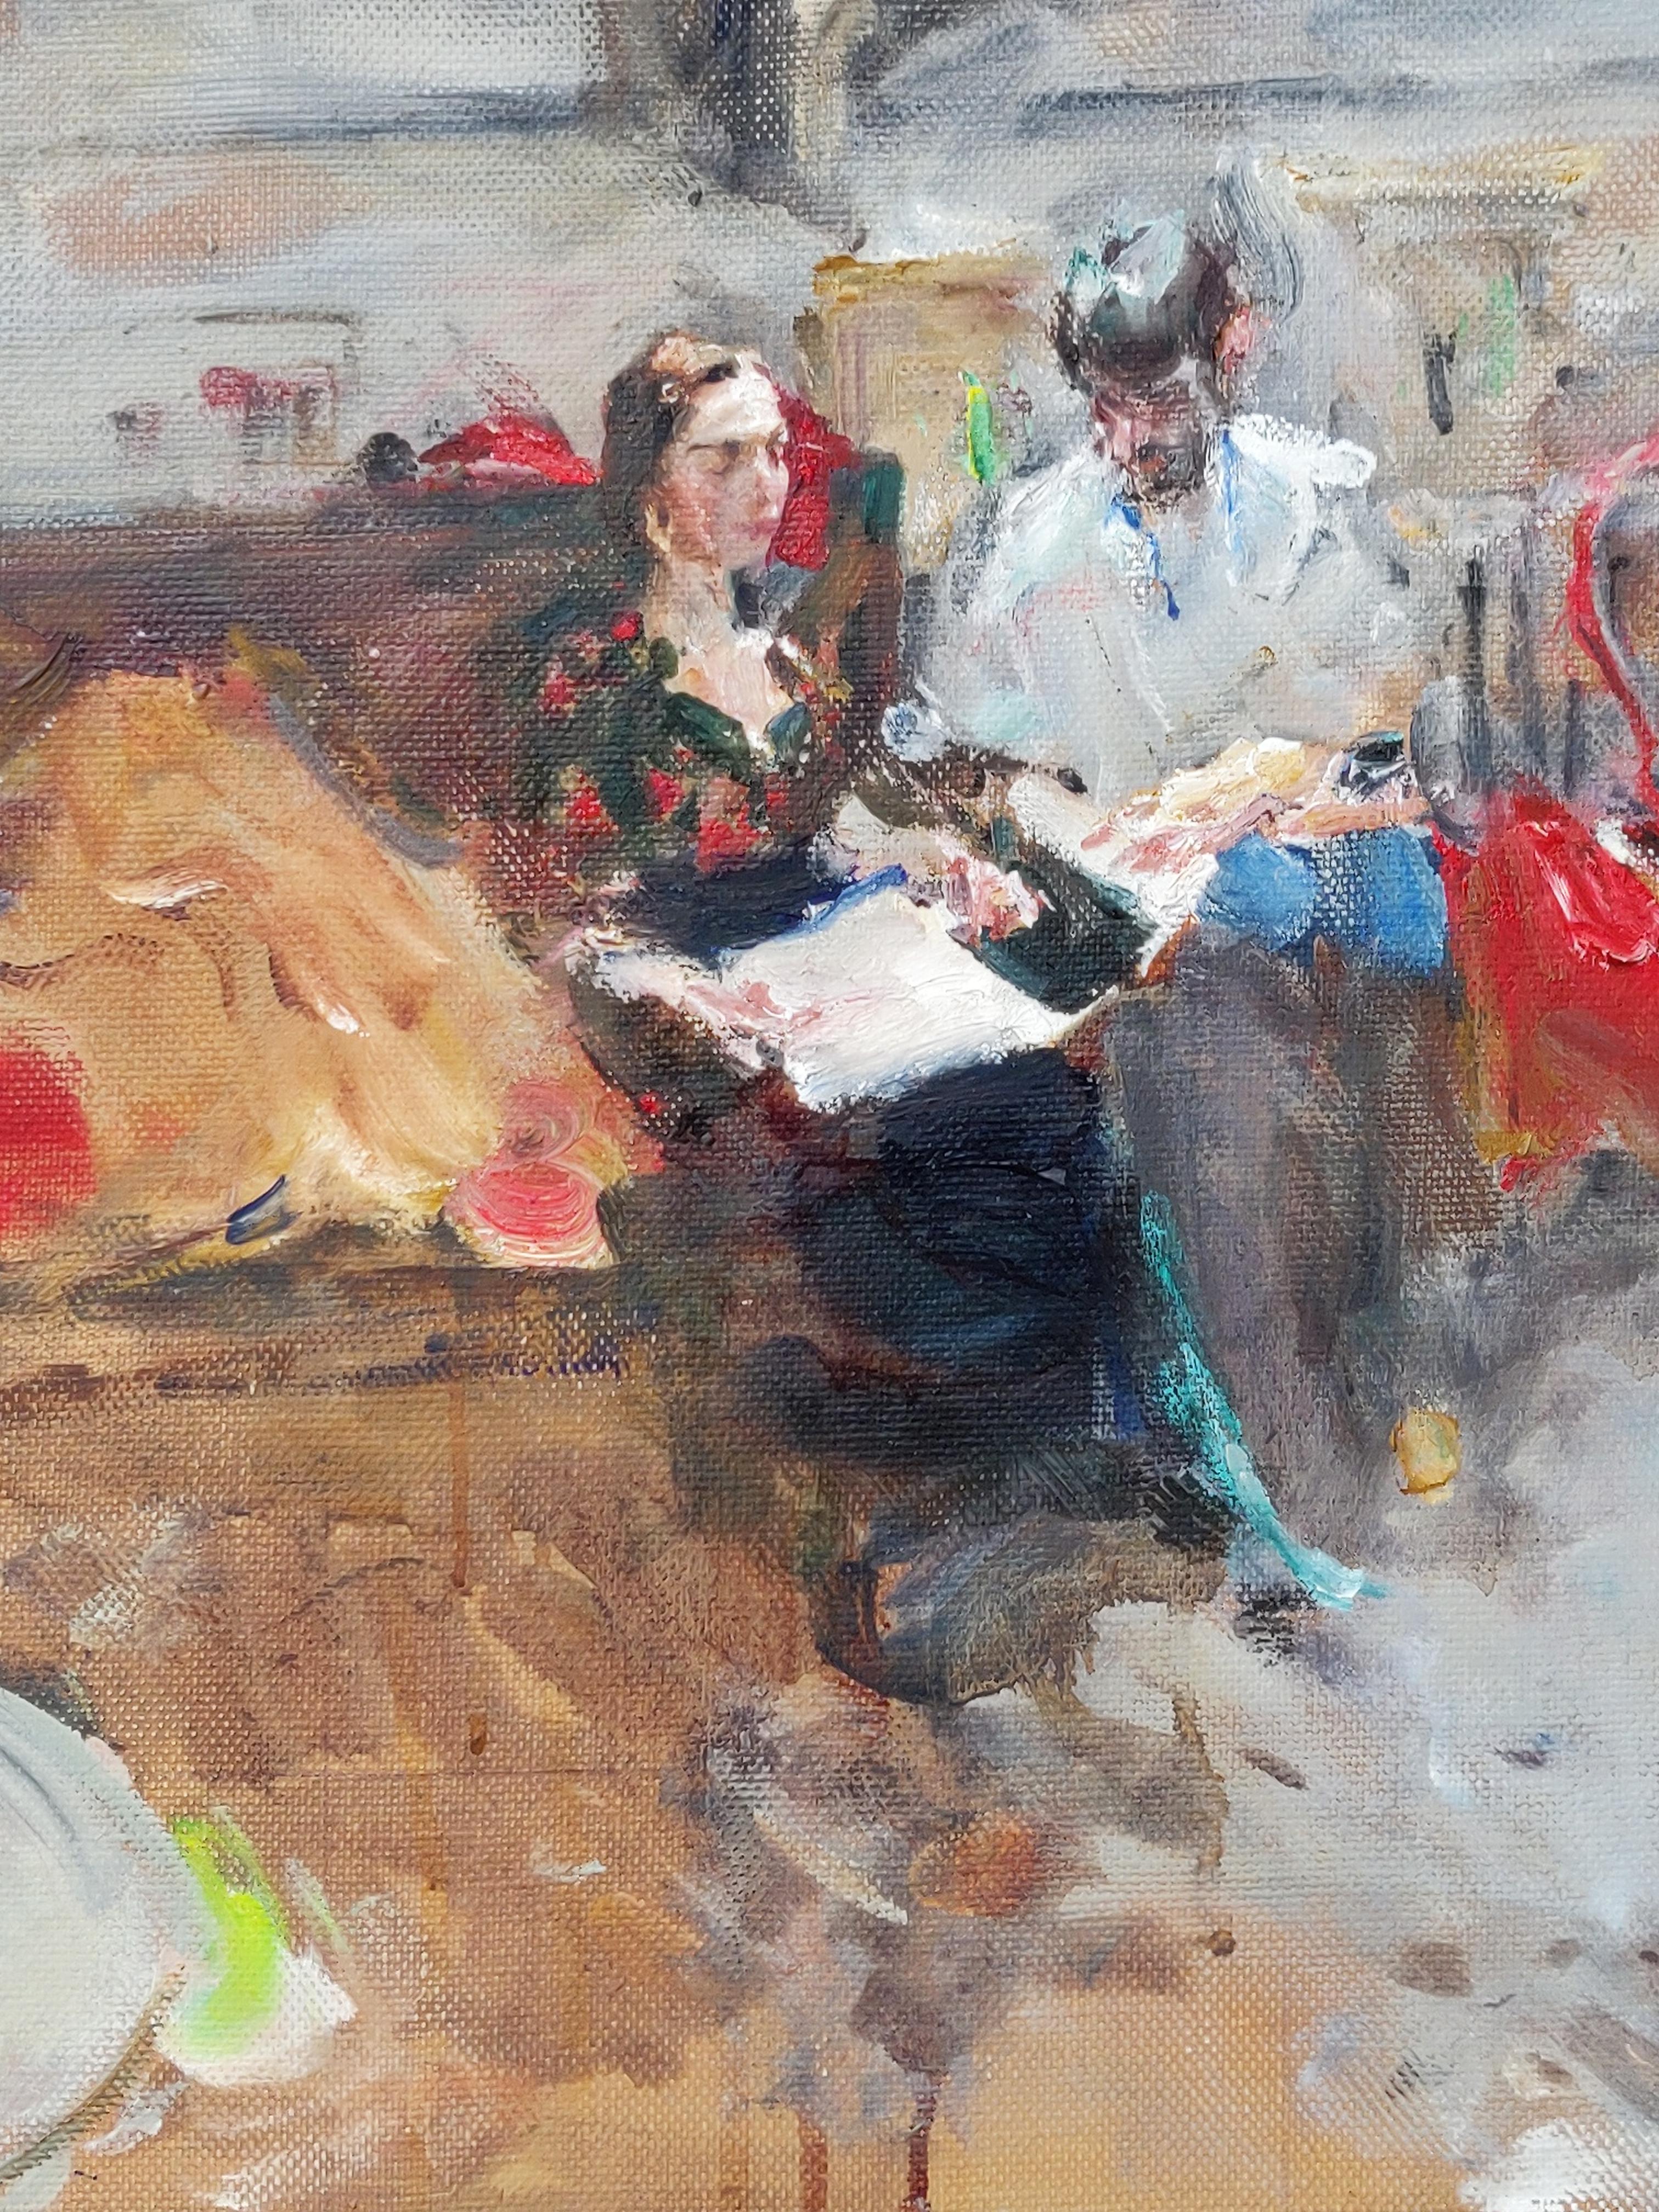 Artist Friends in the Studio - 21st Century Contemporary Impressionist Painting - Brown Figurative Painting by Yuriy Ushakov